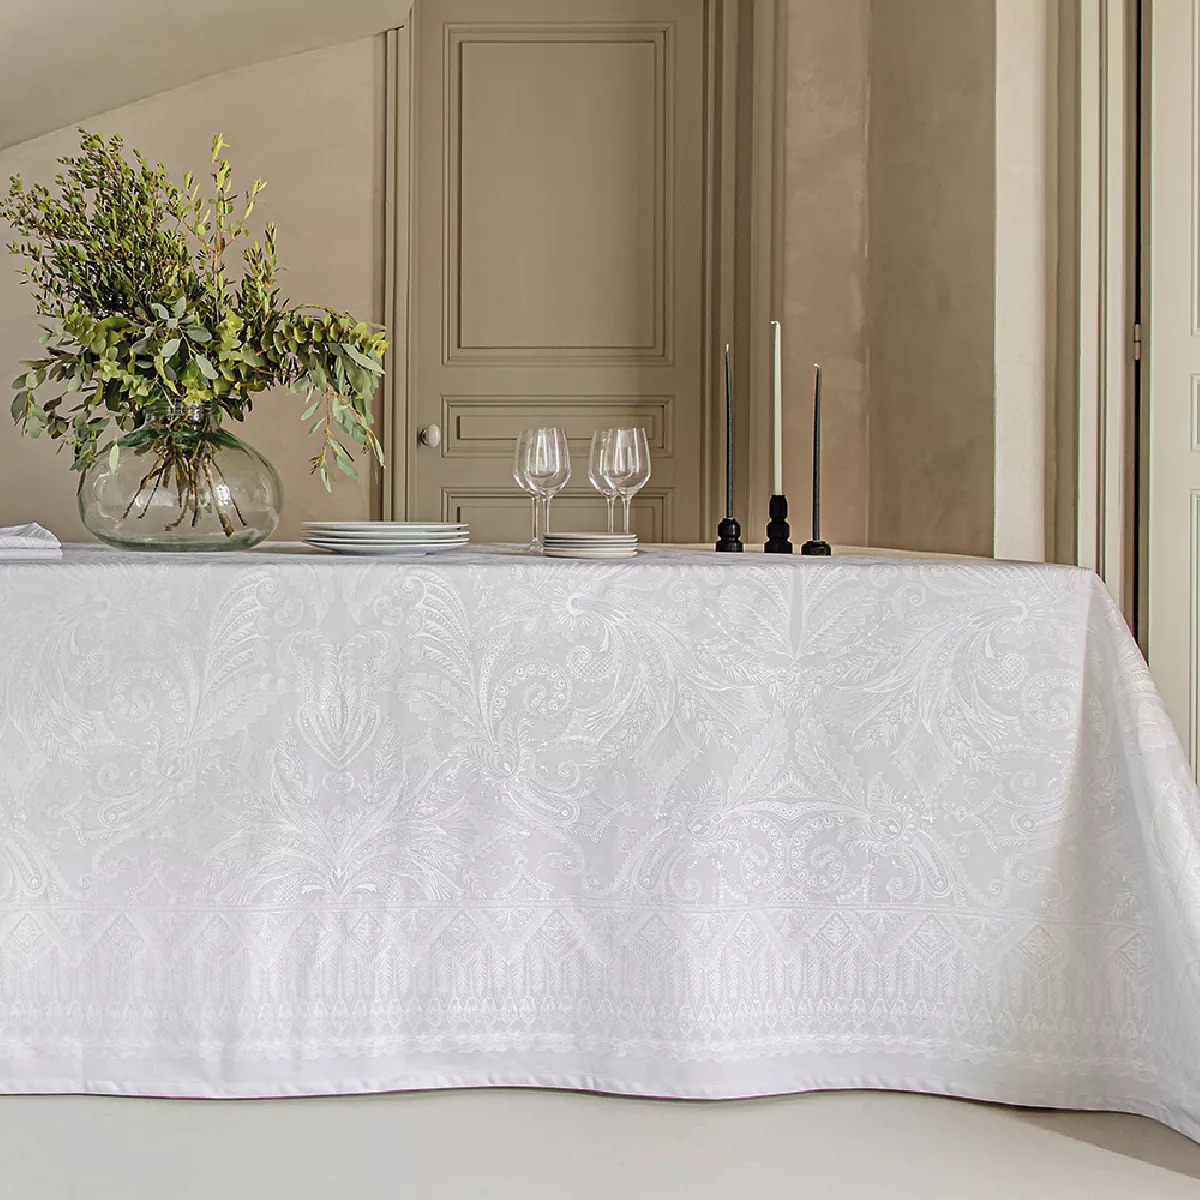 grey-100-cotton-stain-repellent-tablecloth-grace-perle (3)